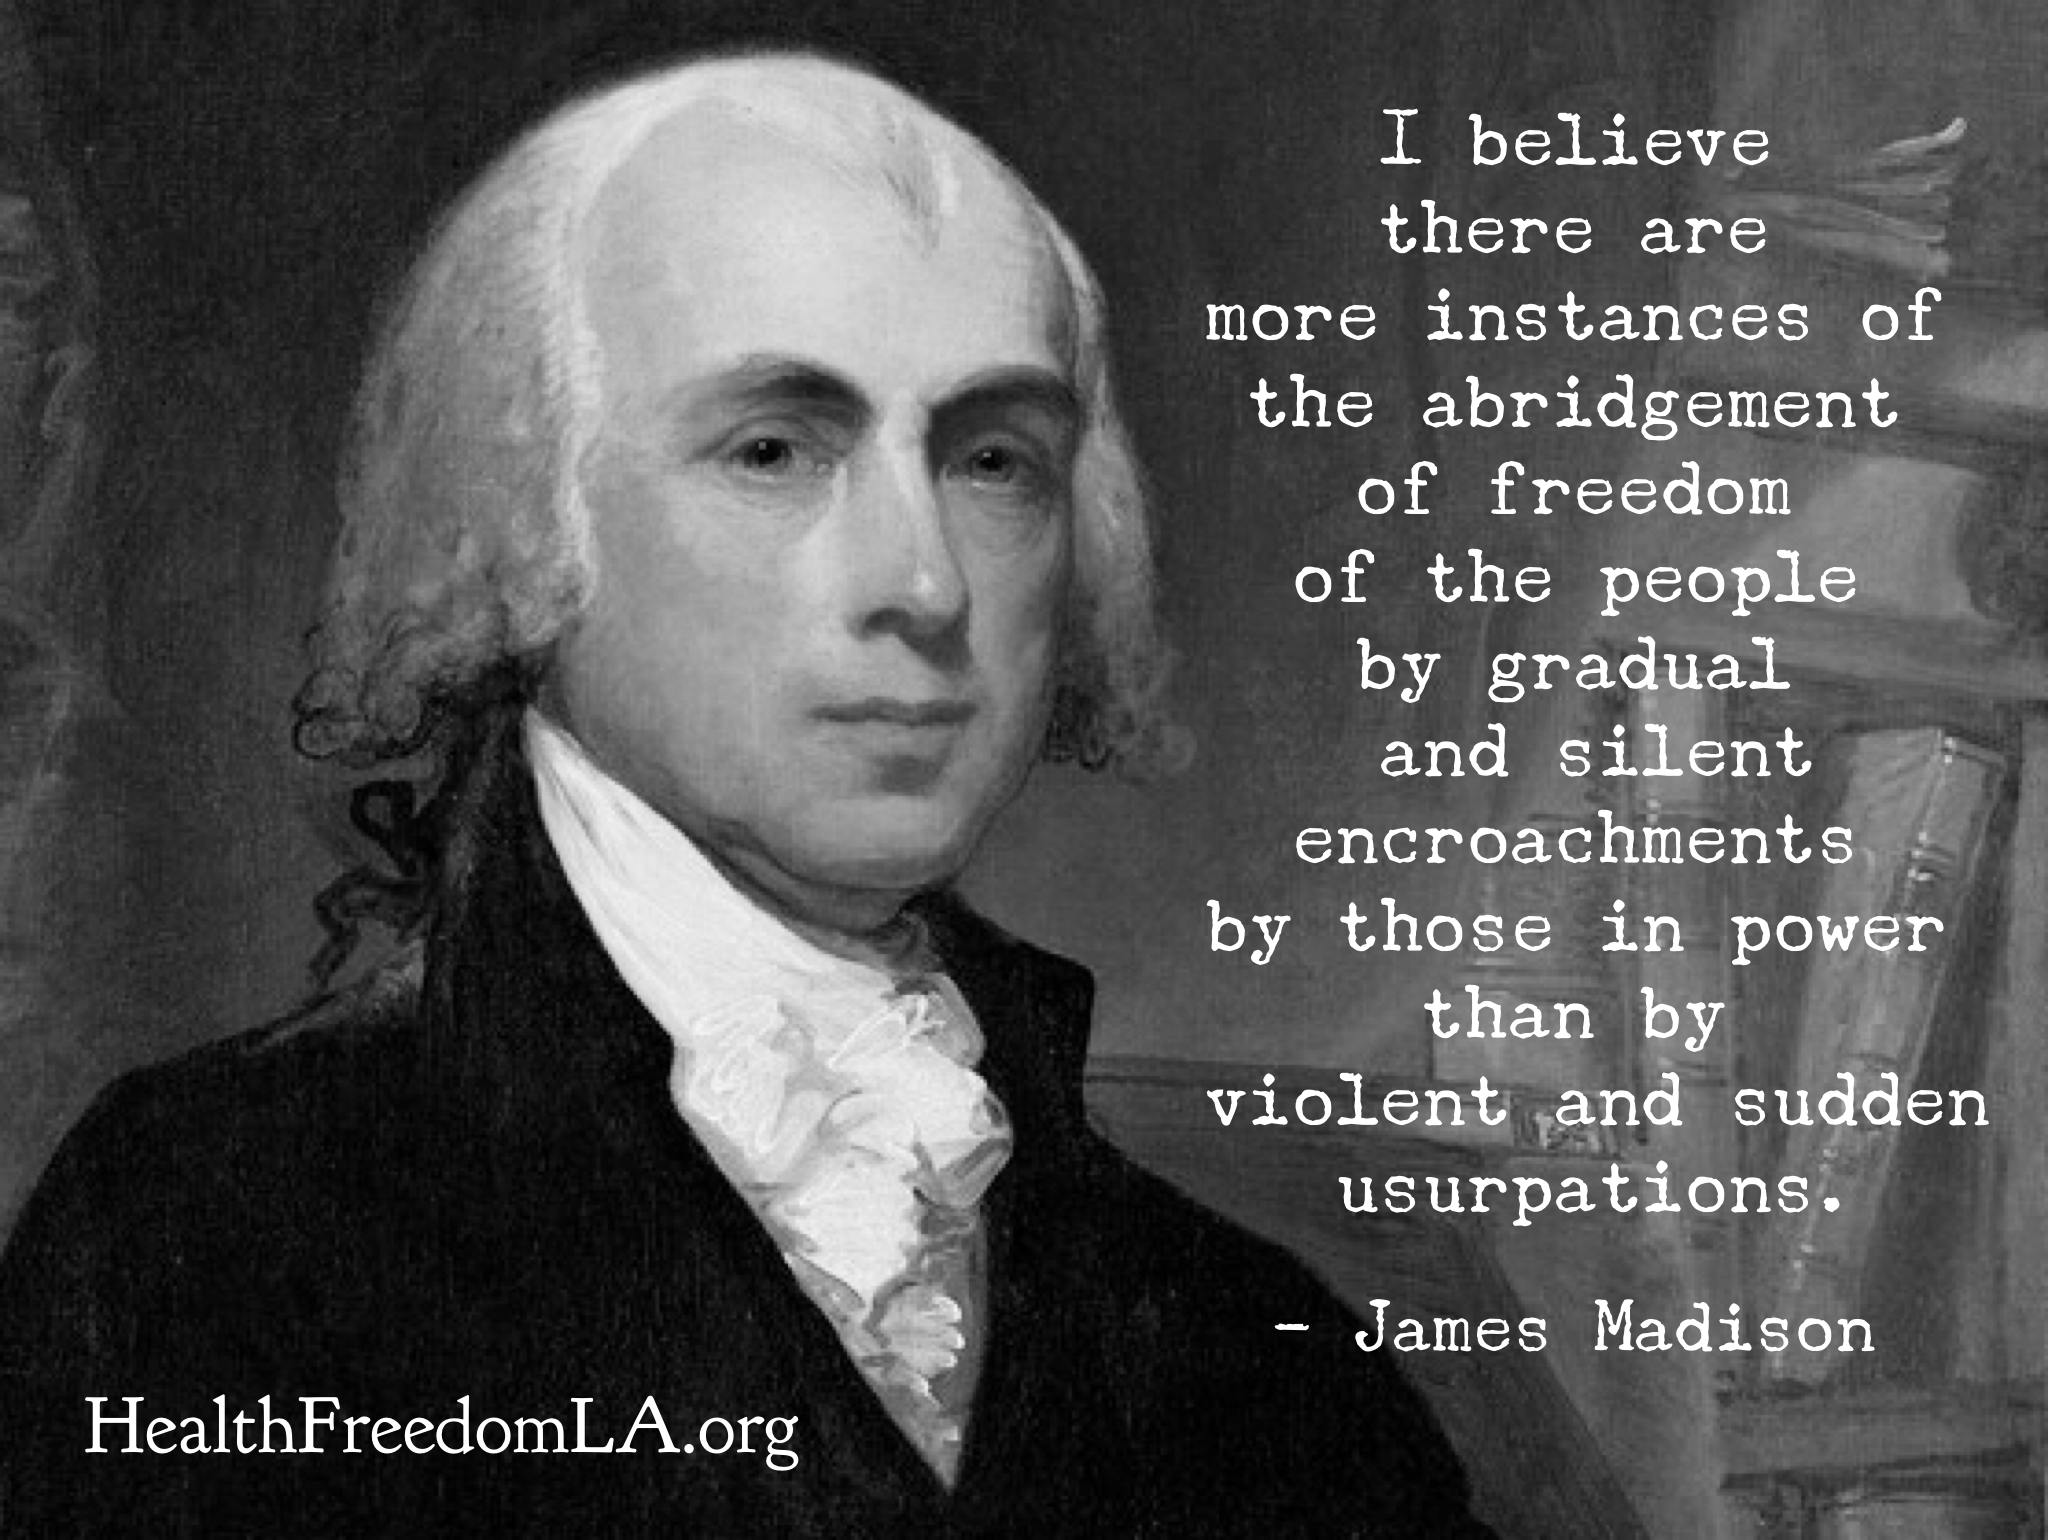 I believe there are more instances of the abridgement of freedom of the people by gradual and silent encroachments by those in power than by violent and sudden usurpations. Quote by James Madison